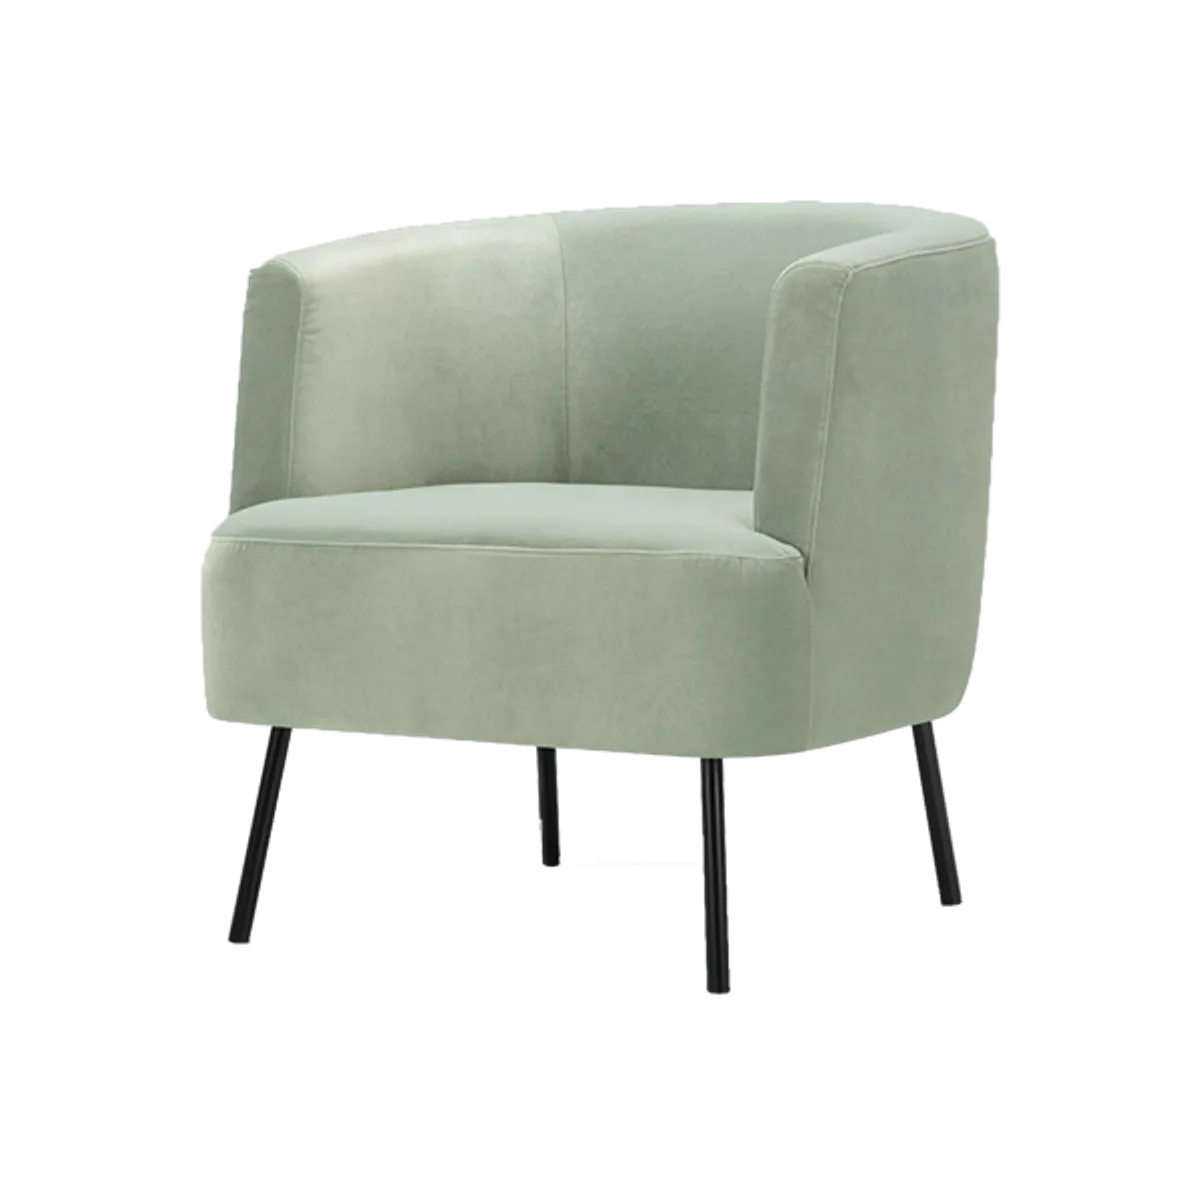 Fione armchair_InsideOutContracts